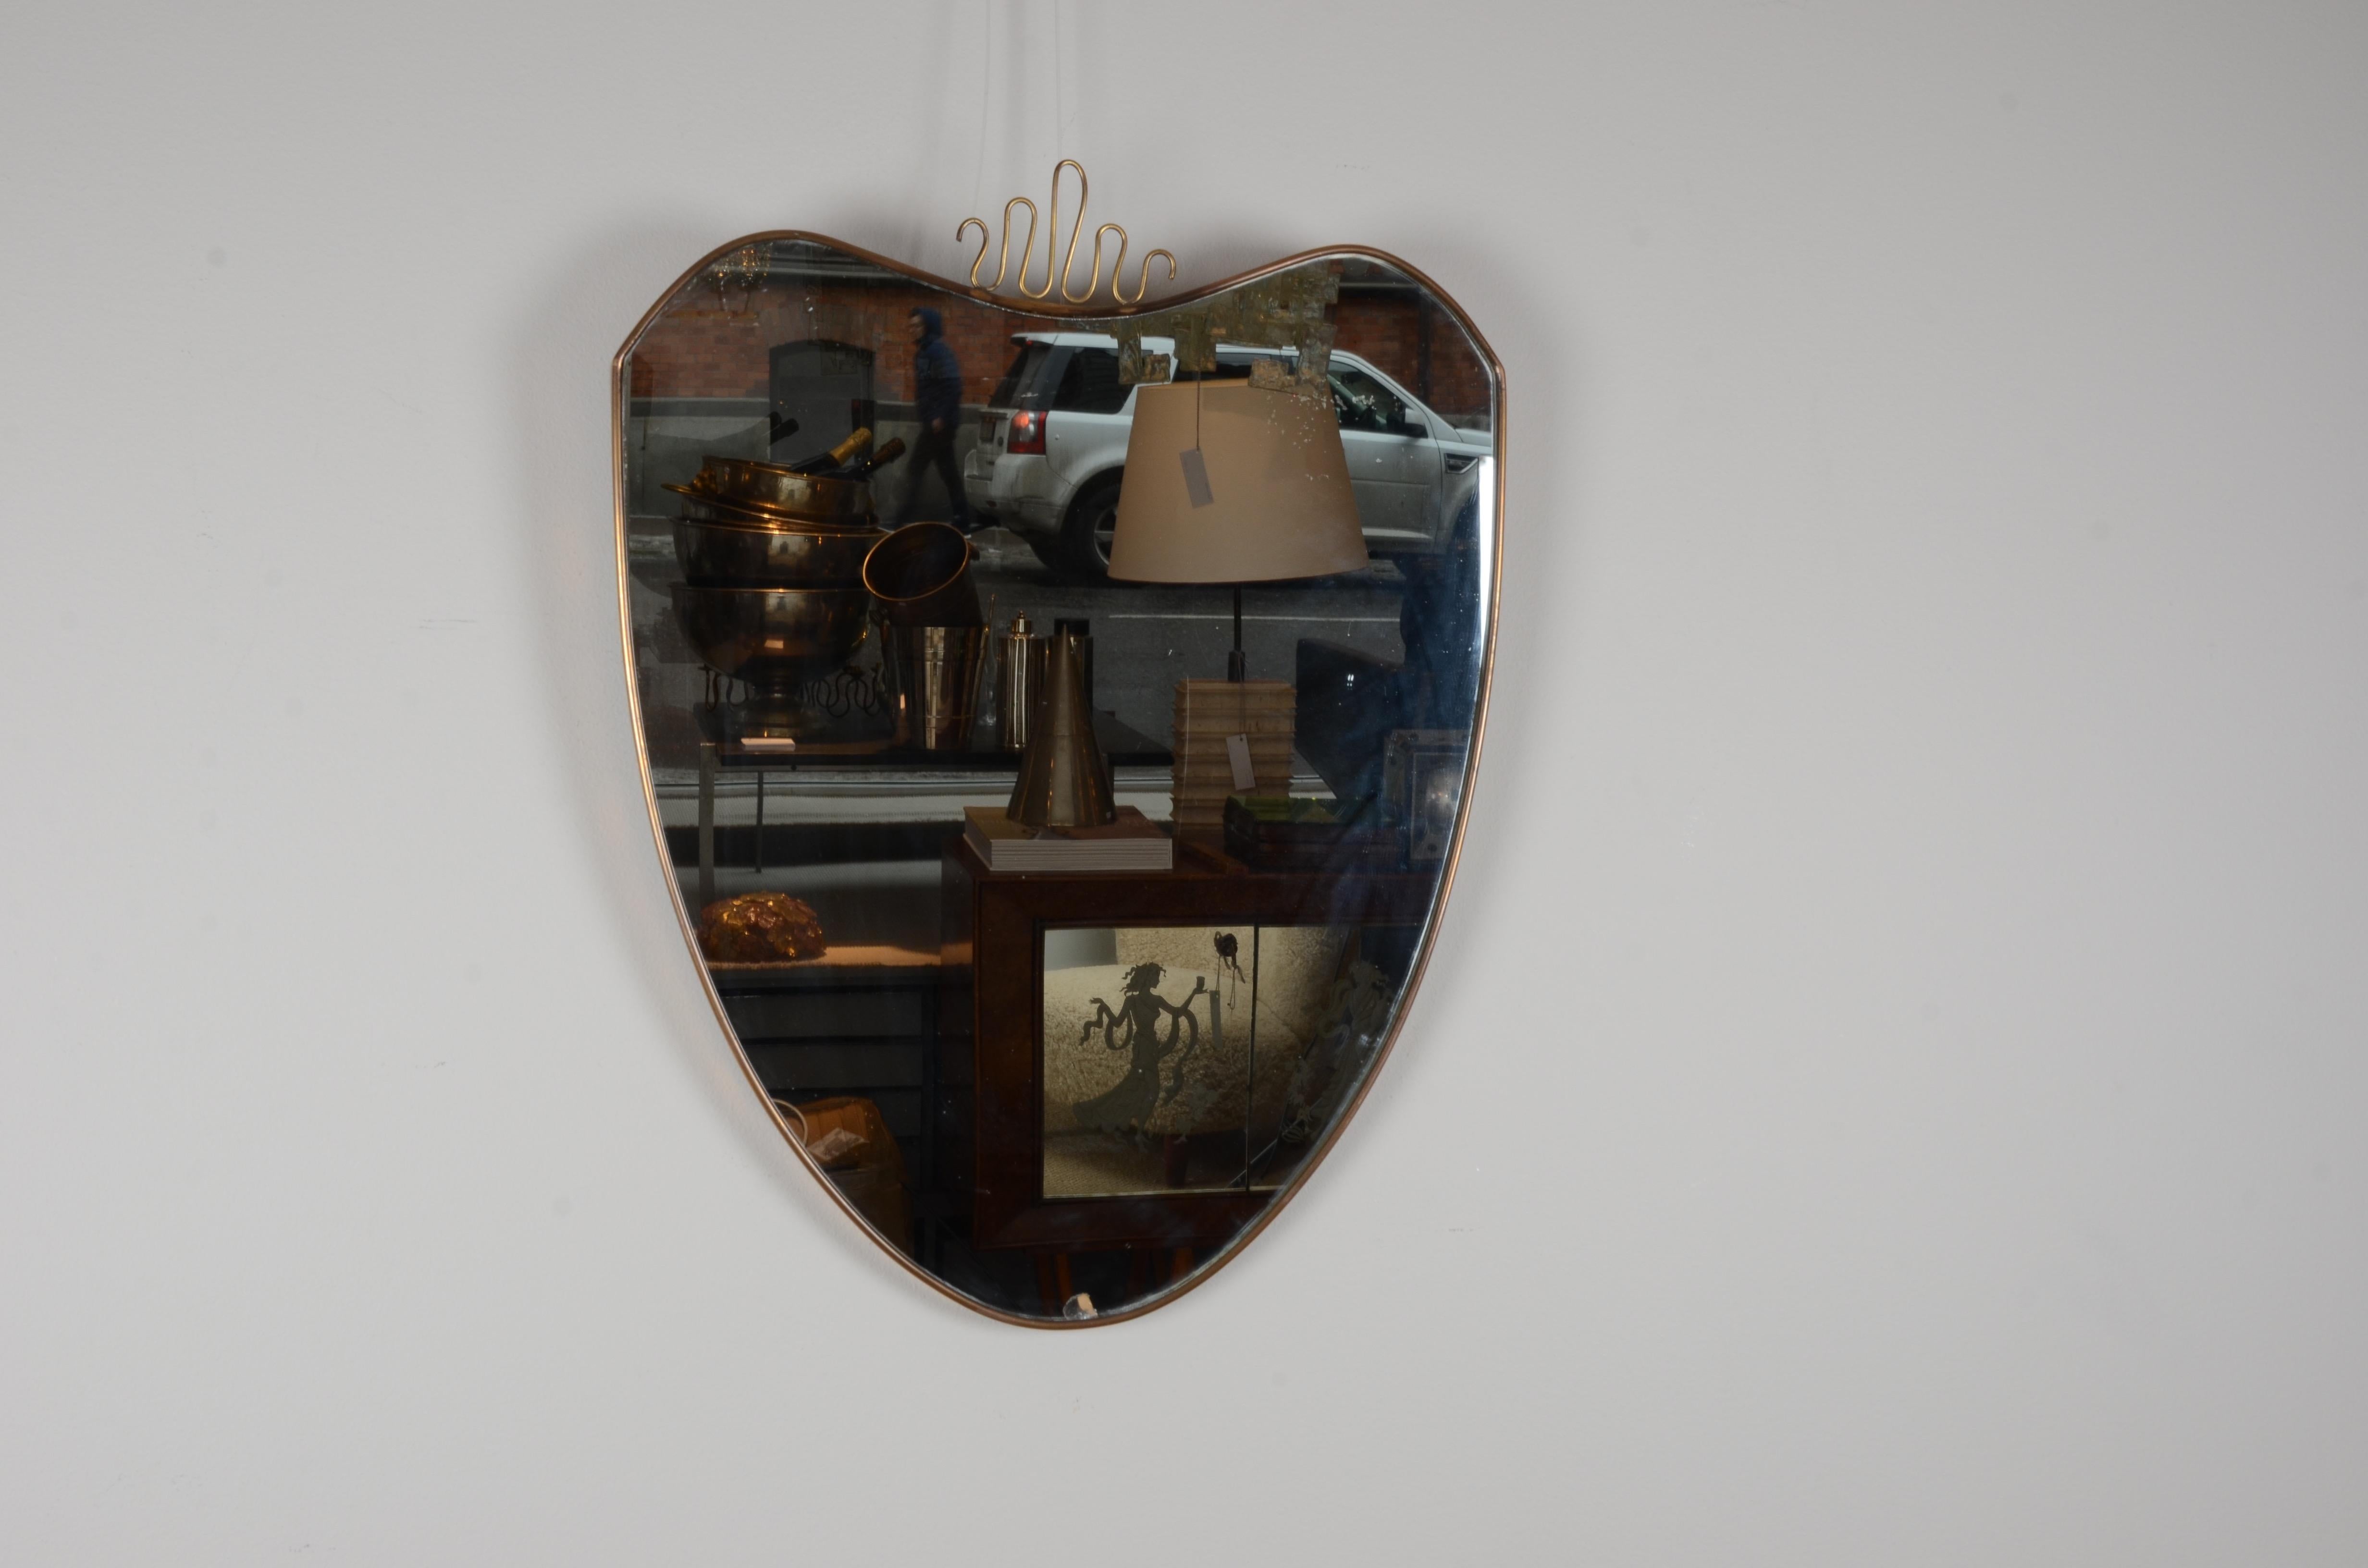 Italian brass mirror, mid-1900s.

Smaller damages on glass, signs of age.